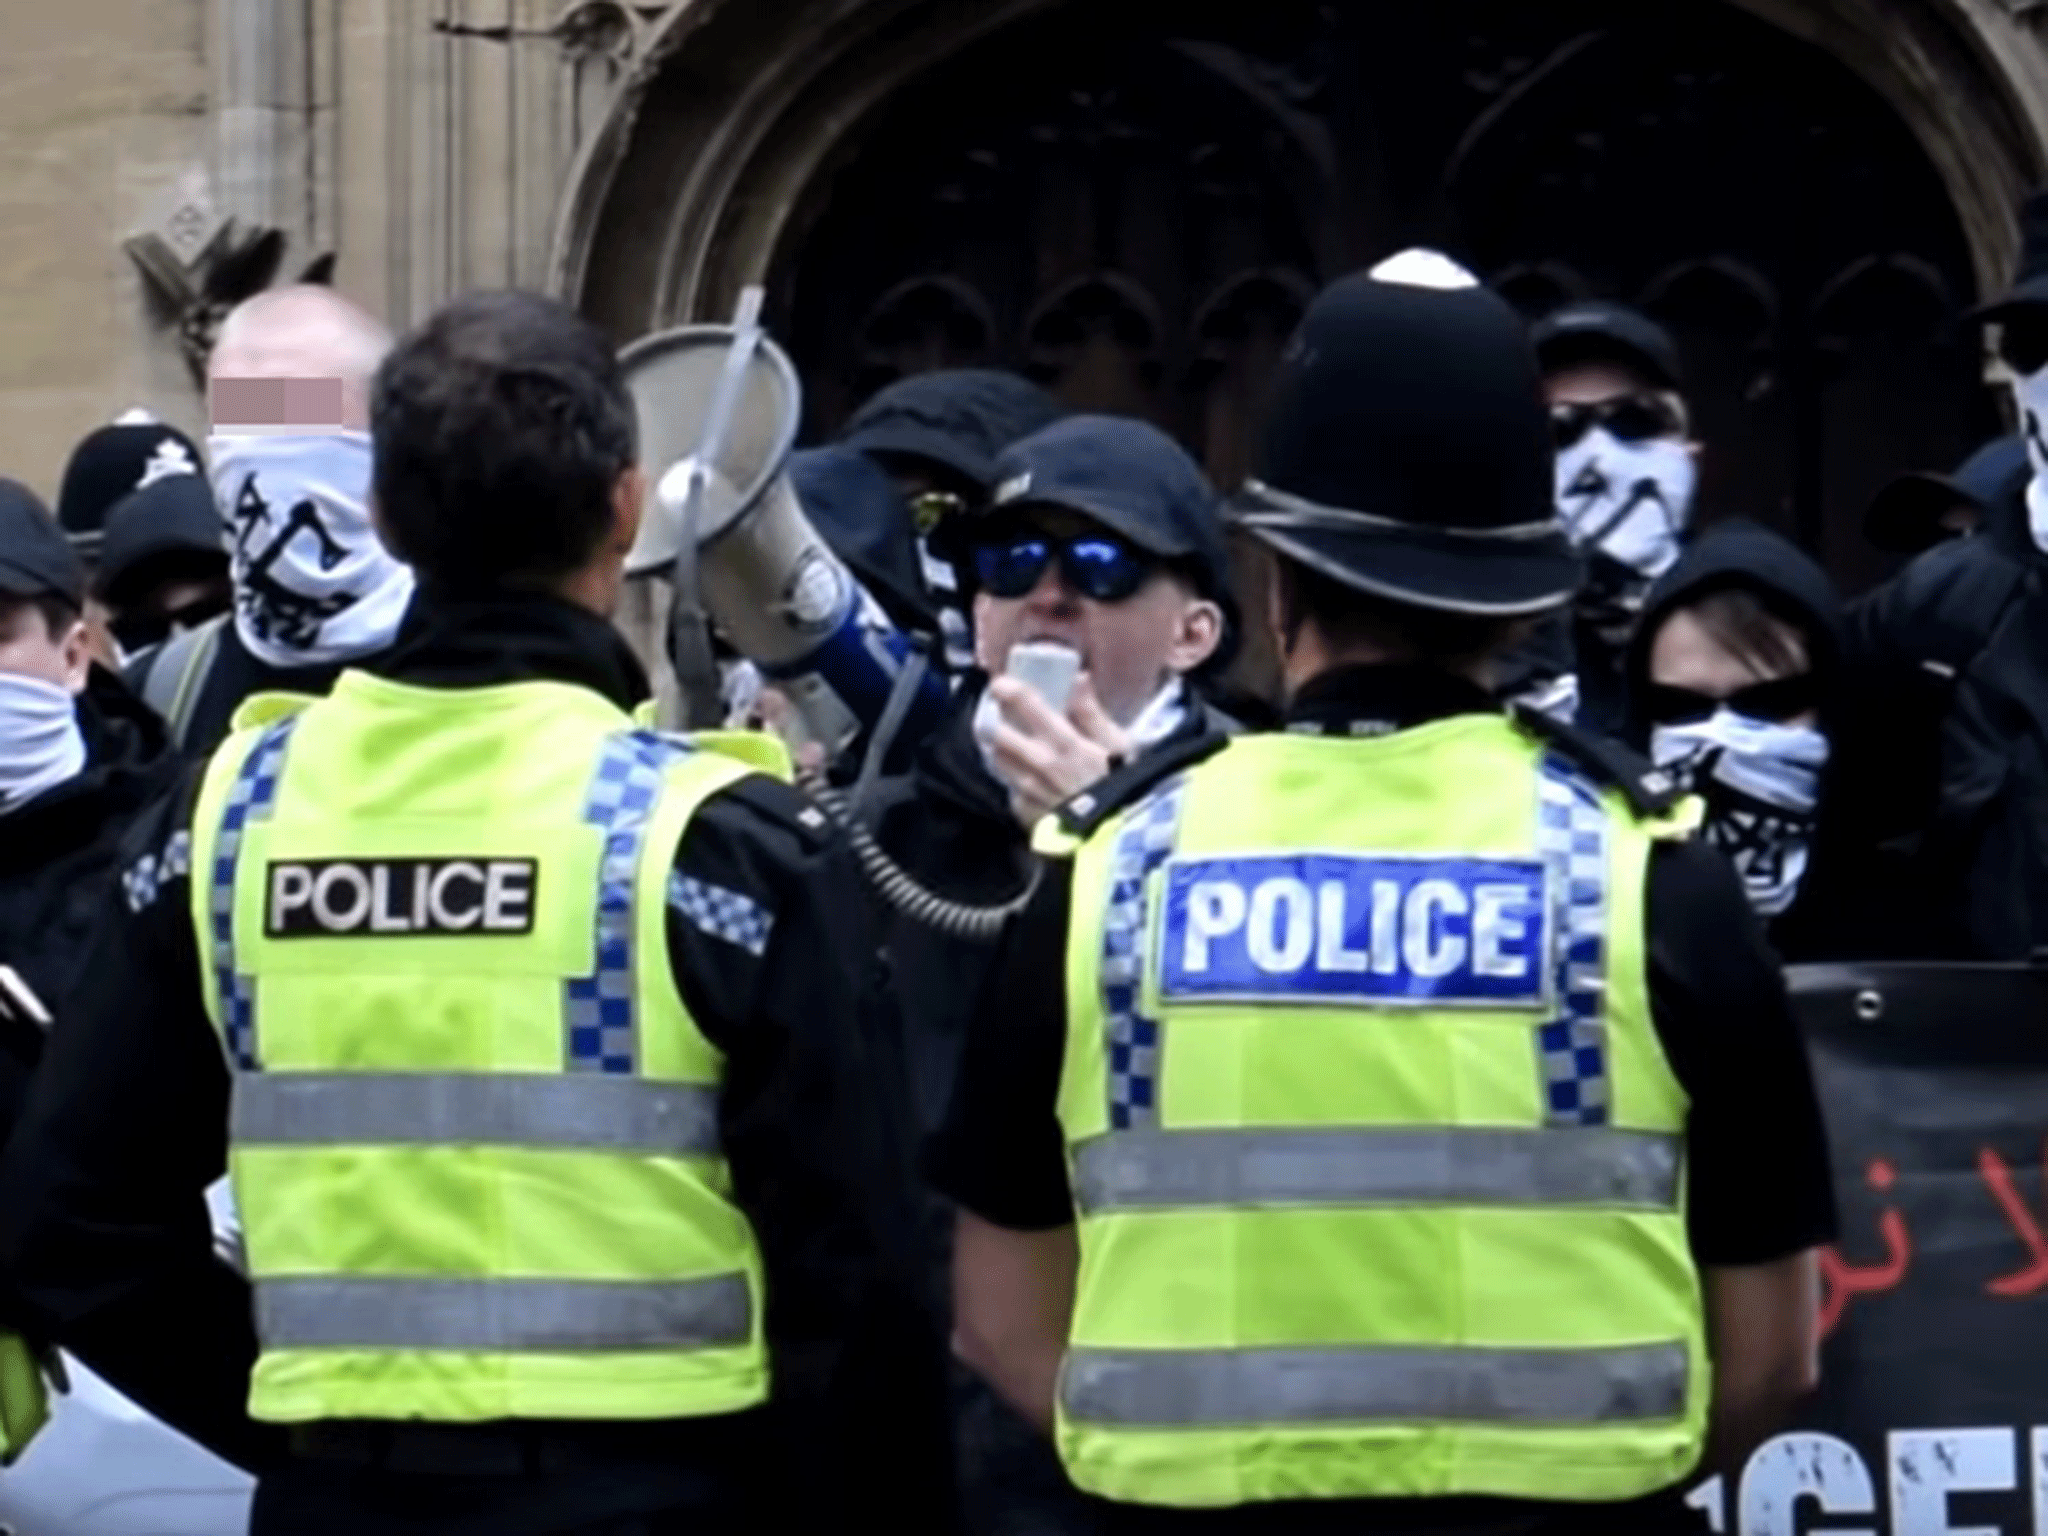 A National Action protest in York last June, prior to the organisation being banned